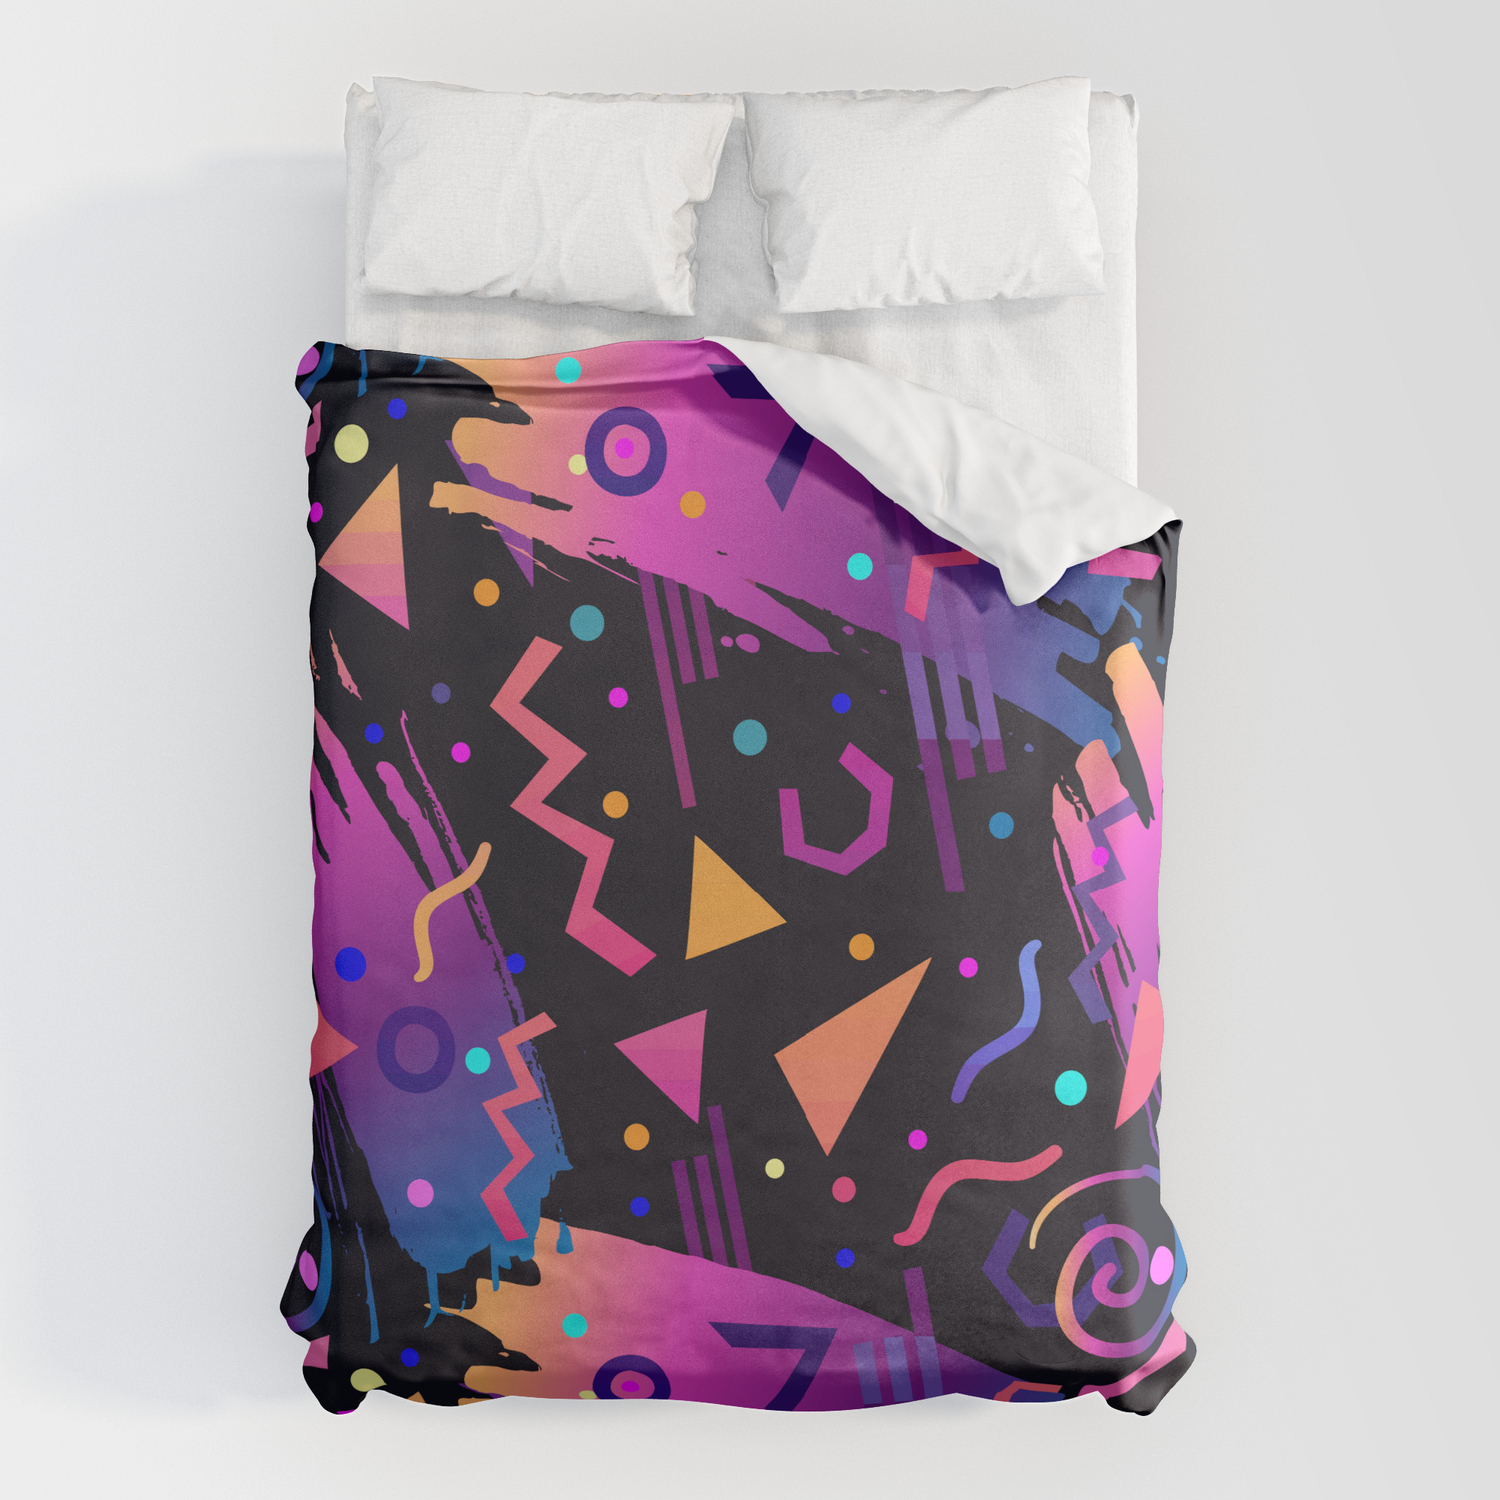 Retro Vintage 80s Or 90s Fashion Style, 80s Duvet Covers